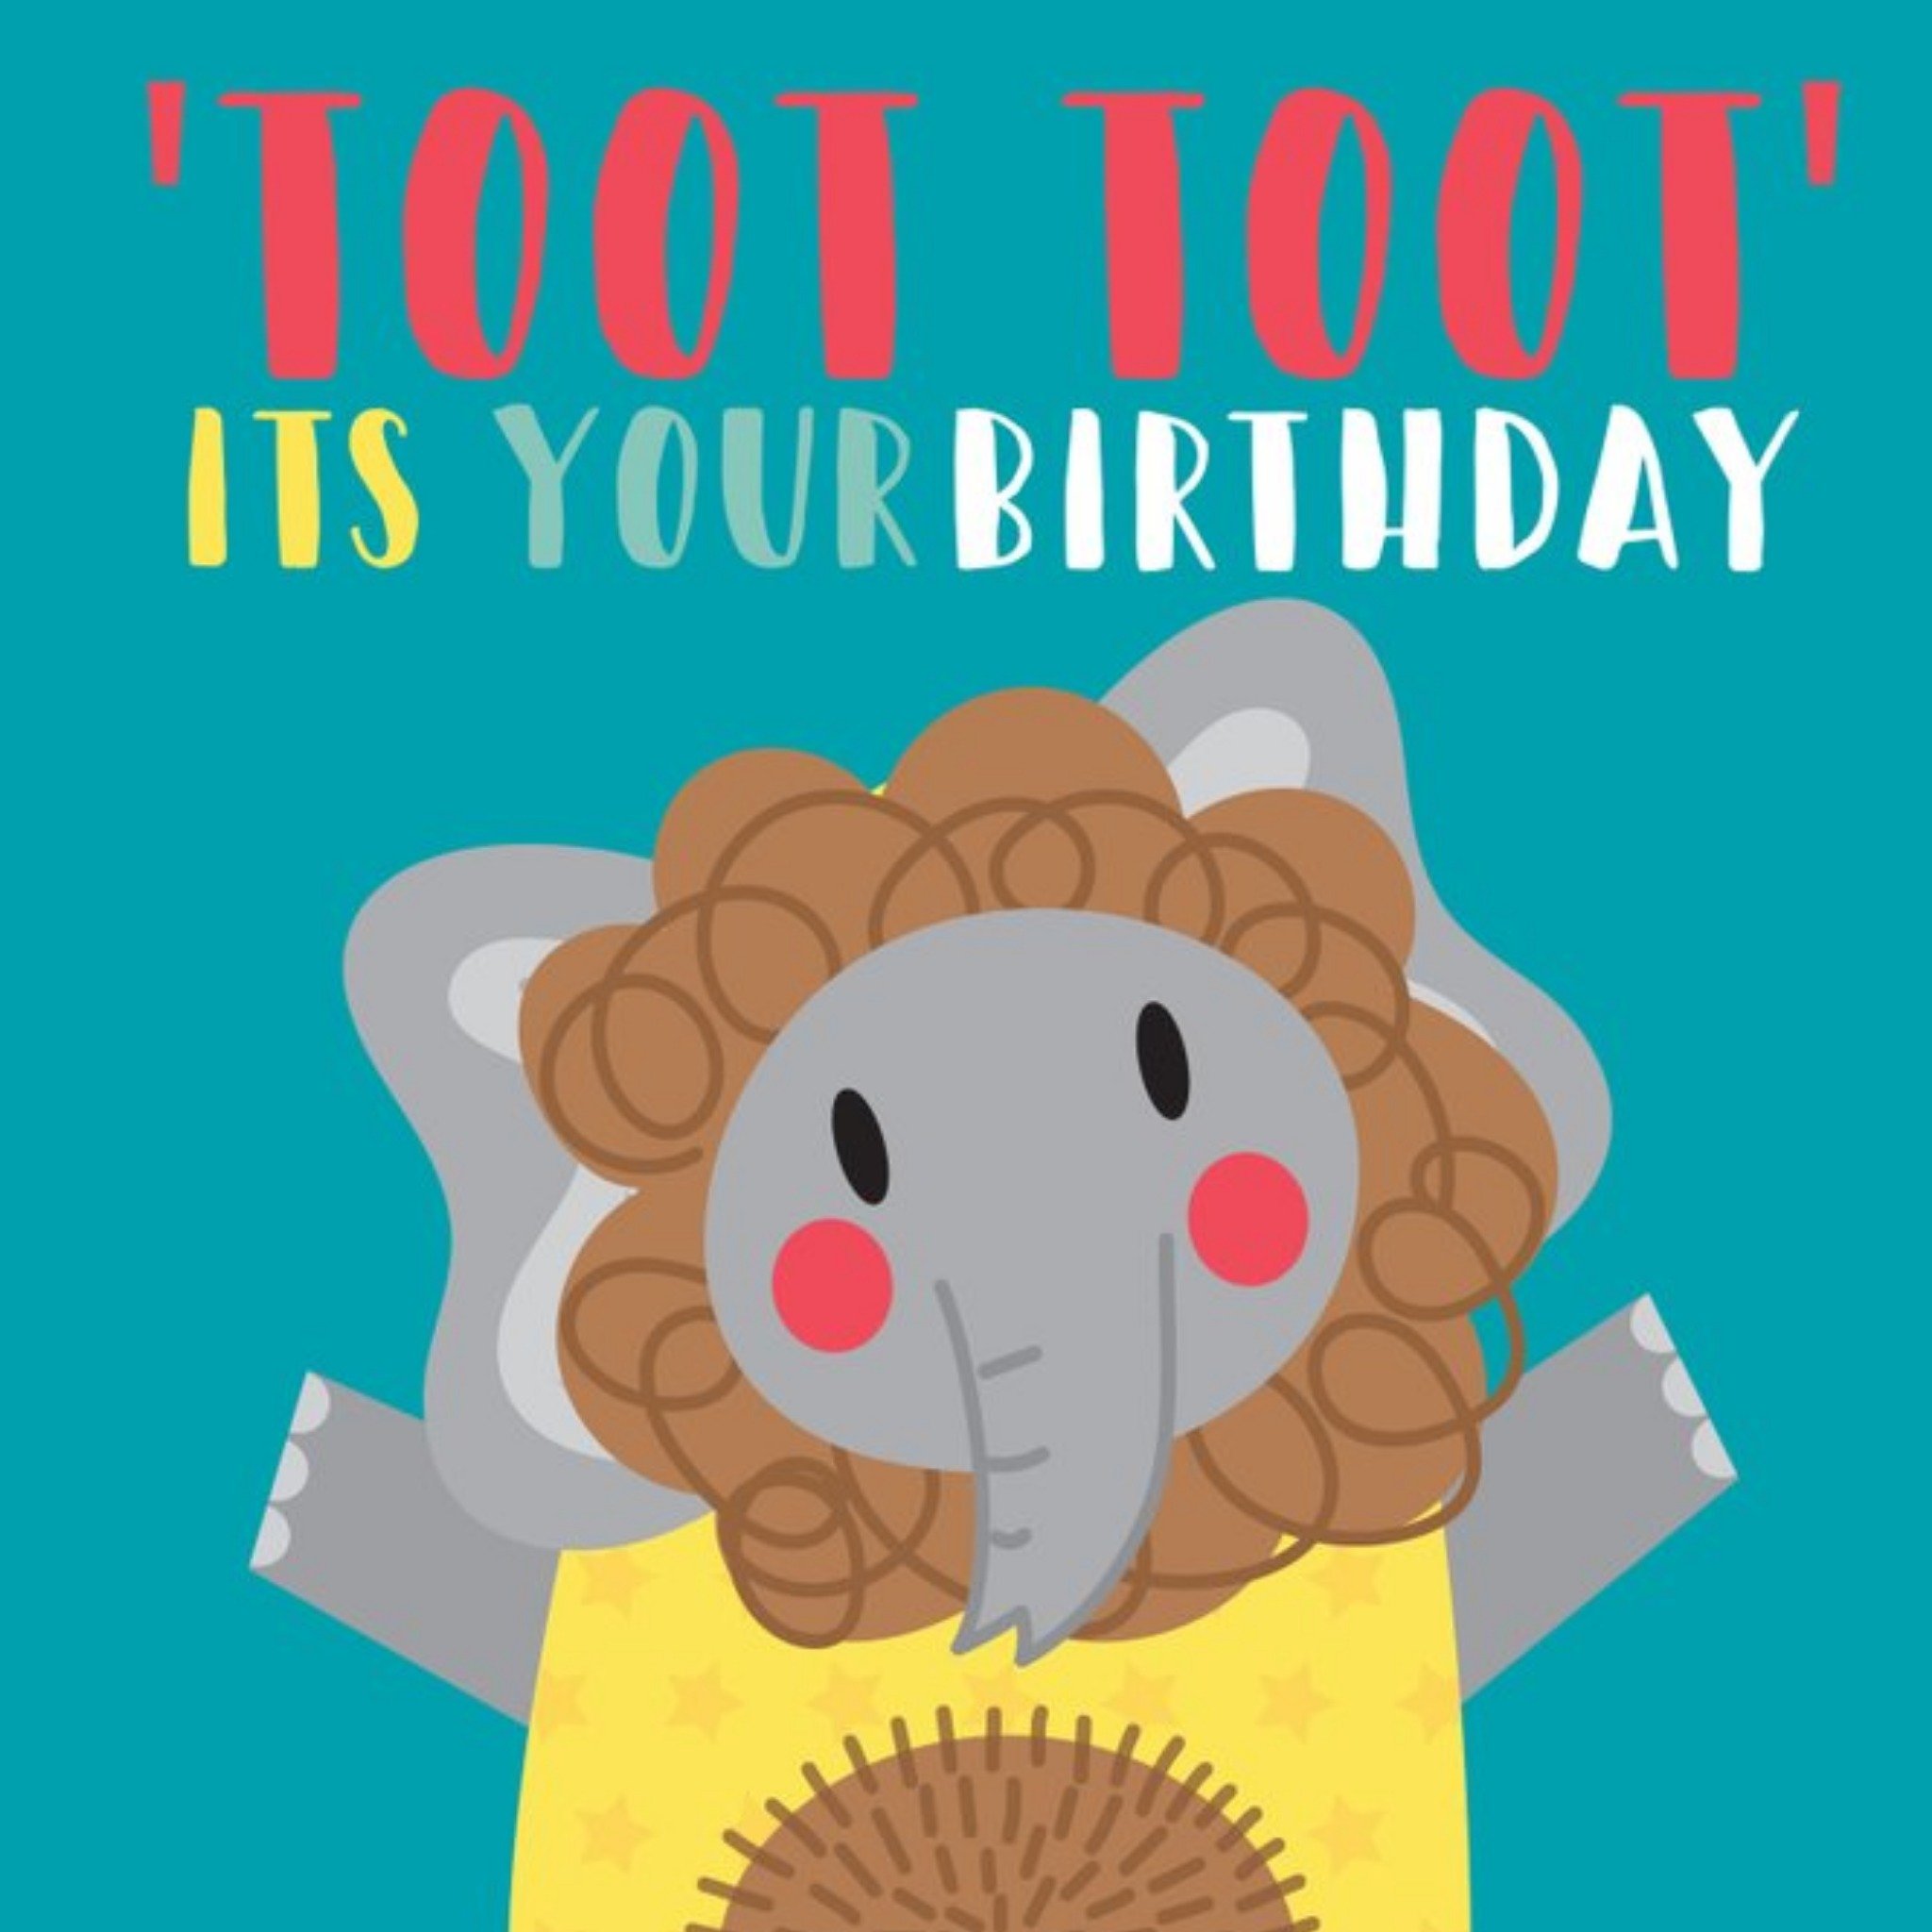 Moonpig Cute Elephant Toot Toot It's Your Birthday Card, Large